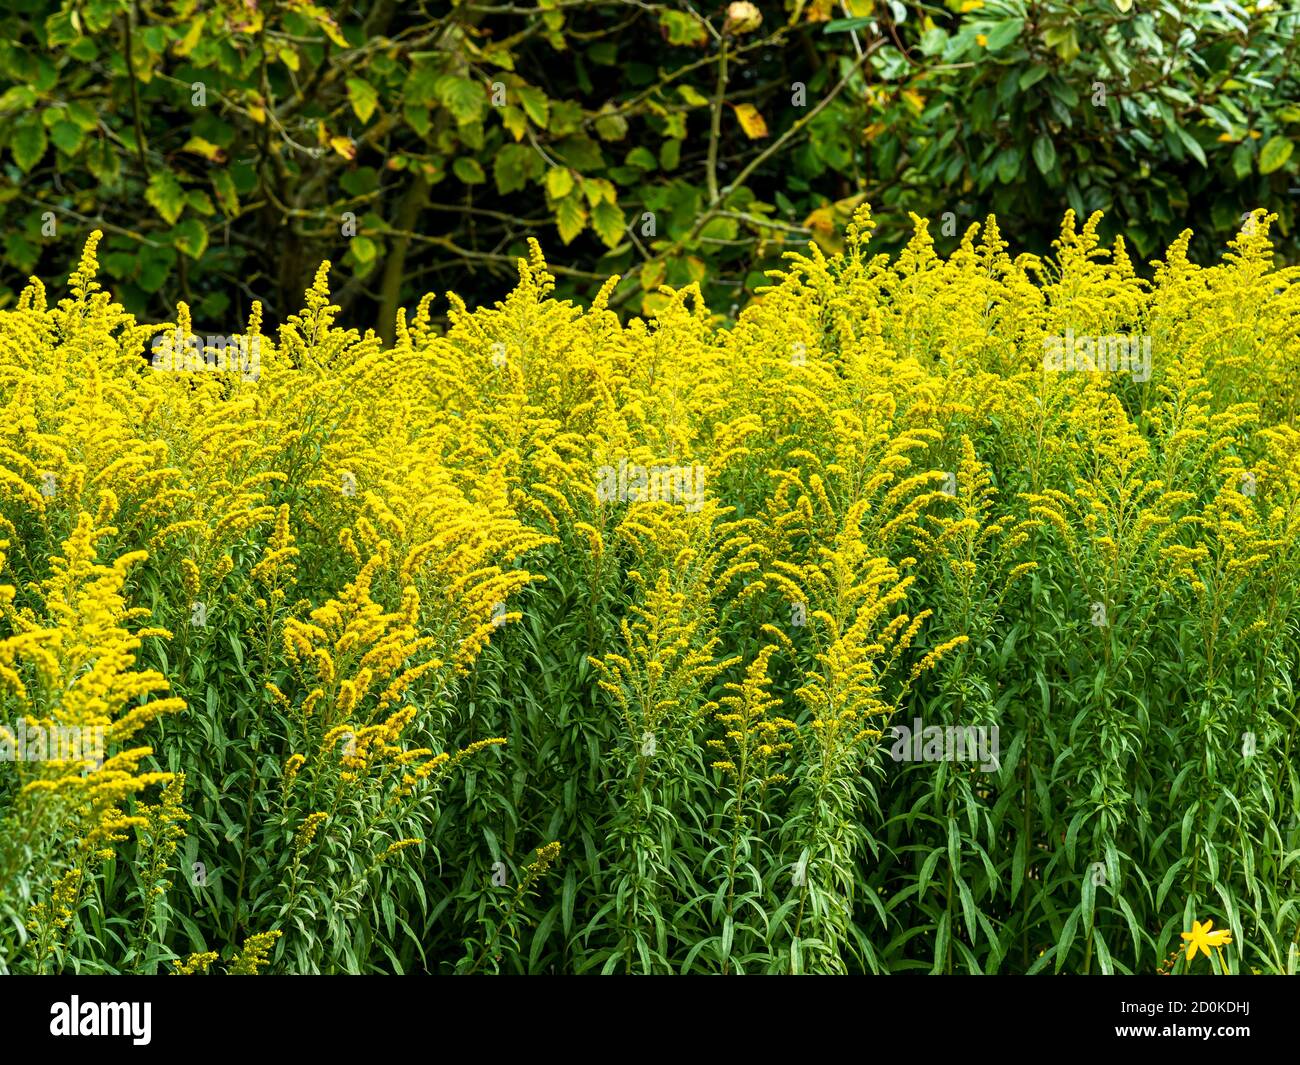 Yellow flowers on goldenrod, variety Solidago Linner Gold, catching sunlight in a garden Stock Photo